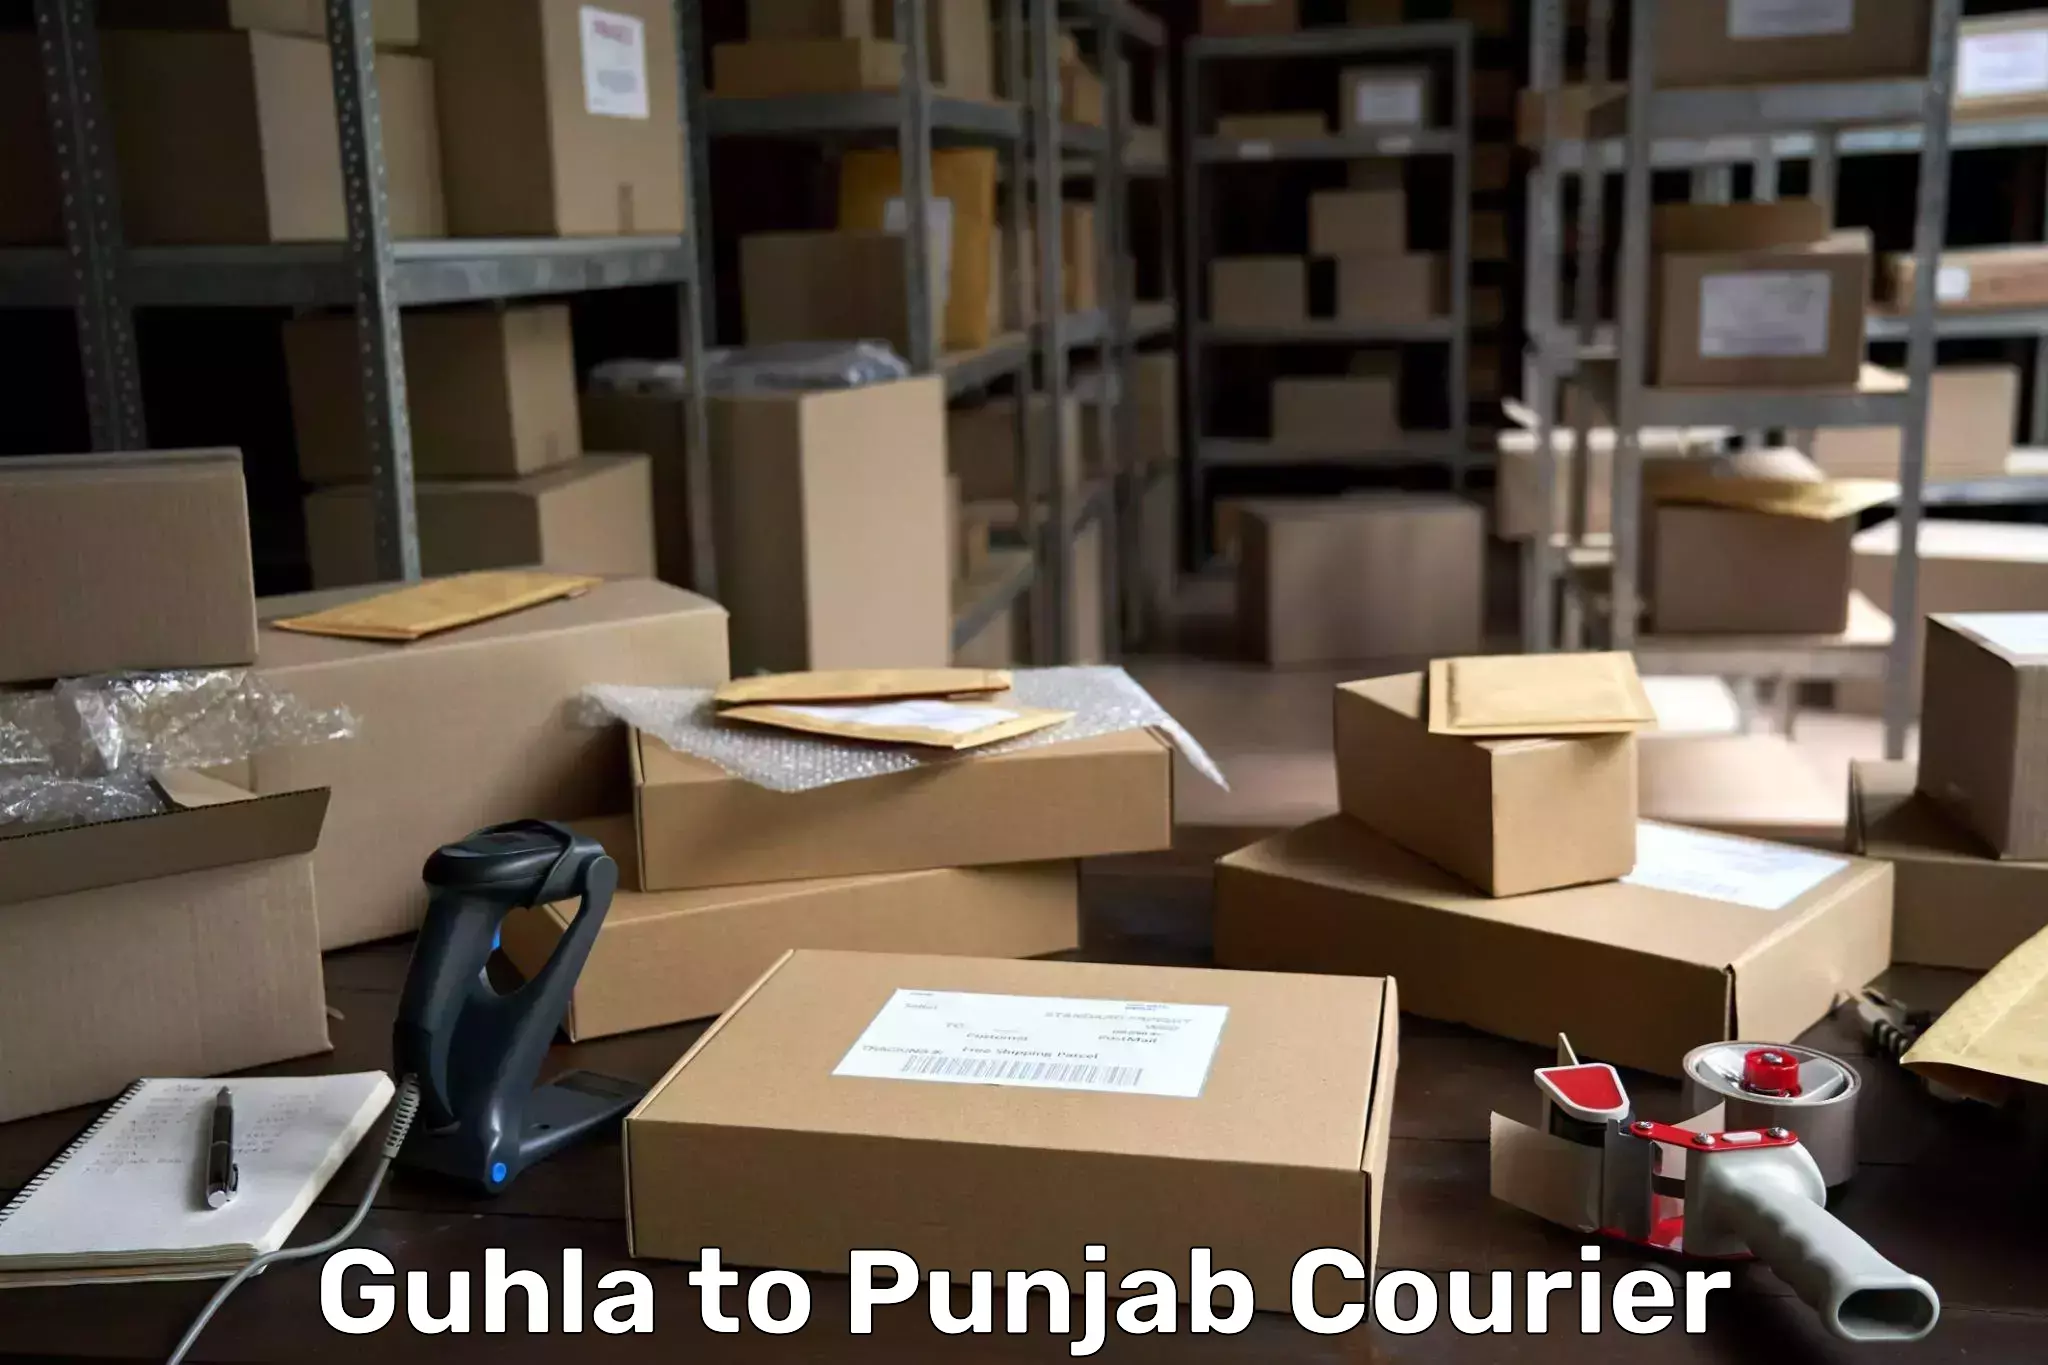 Global shipping networks in Guhla to Mohali